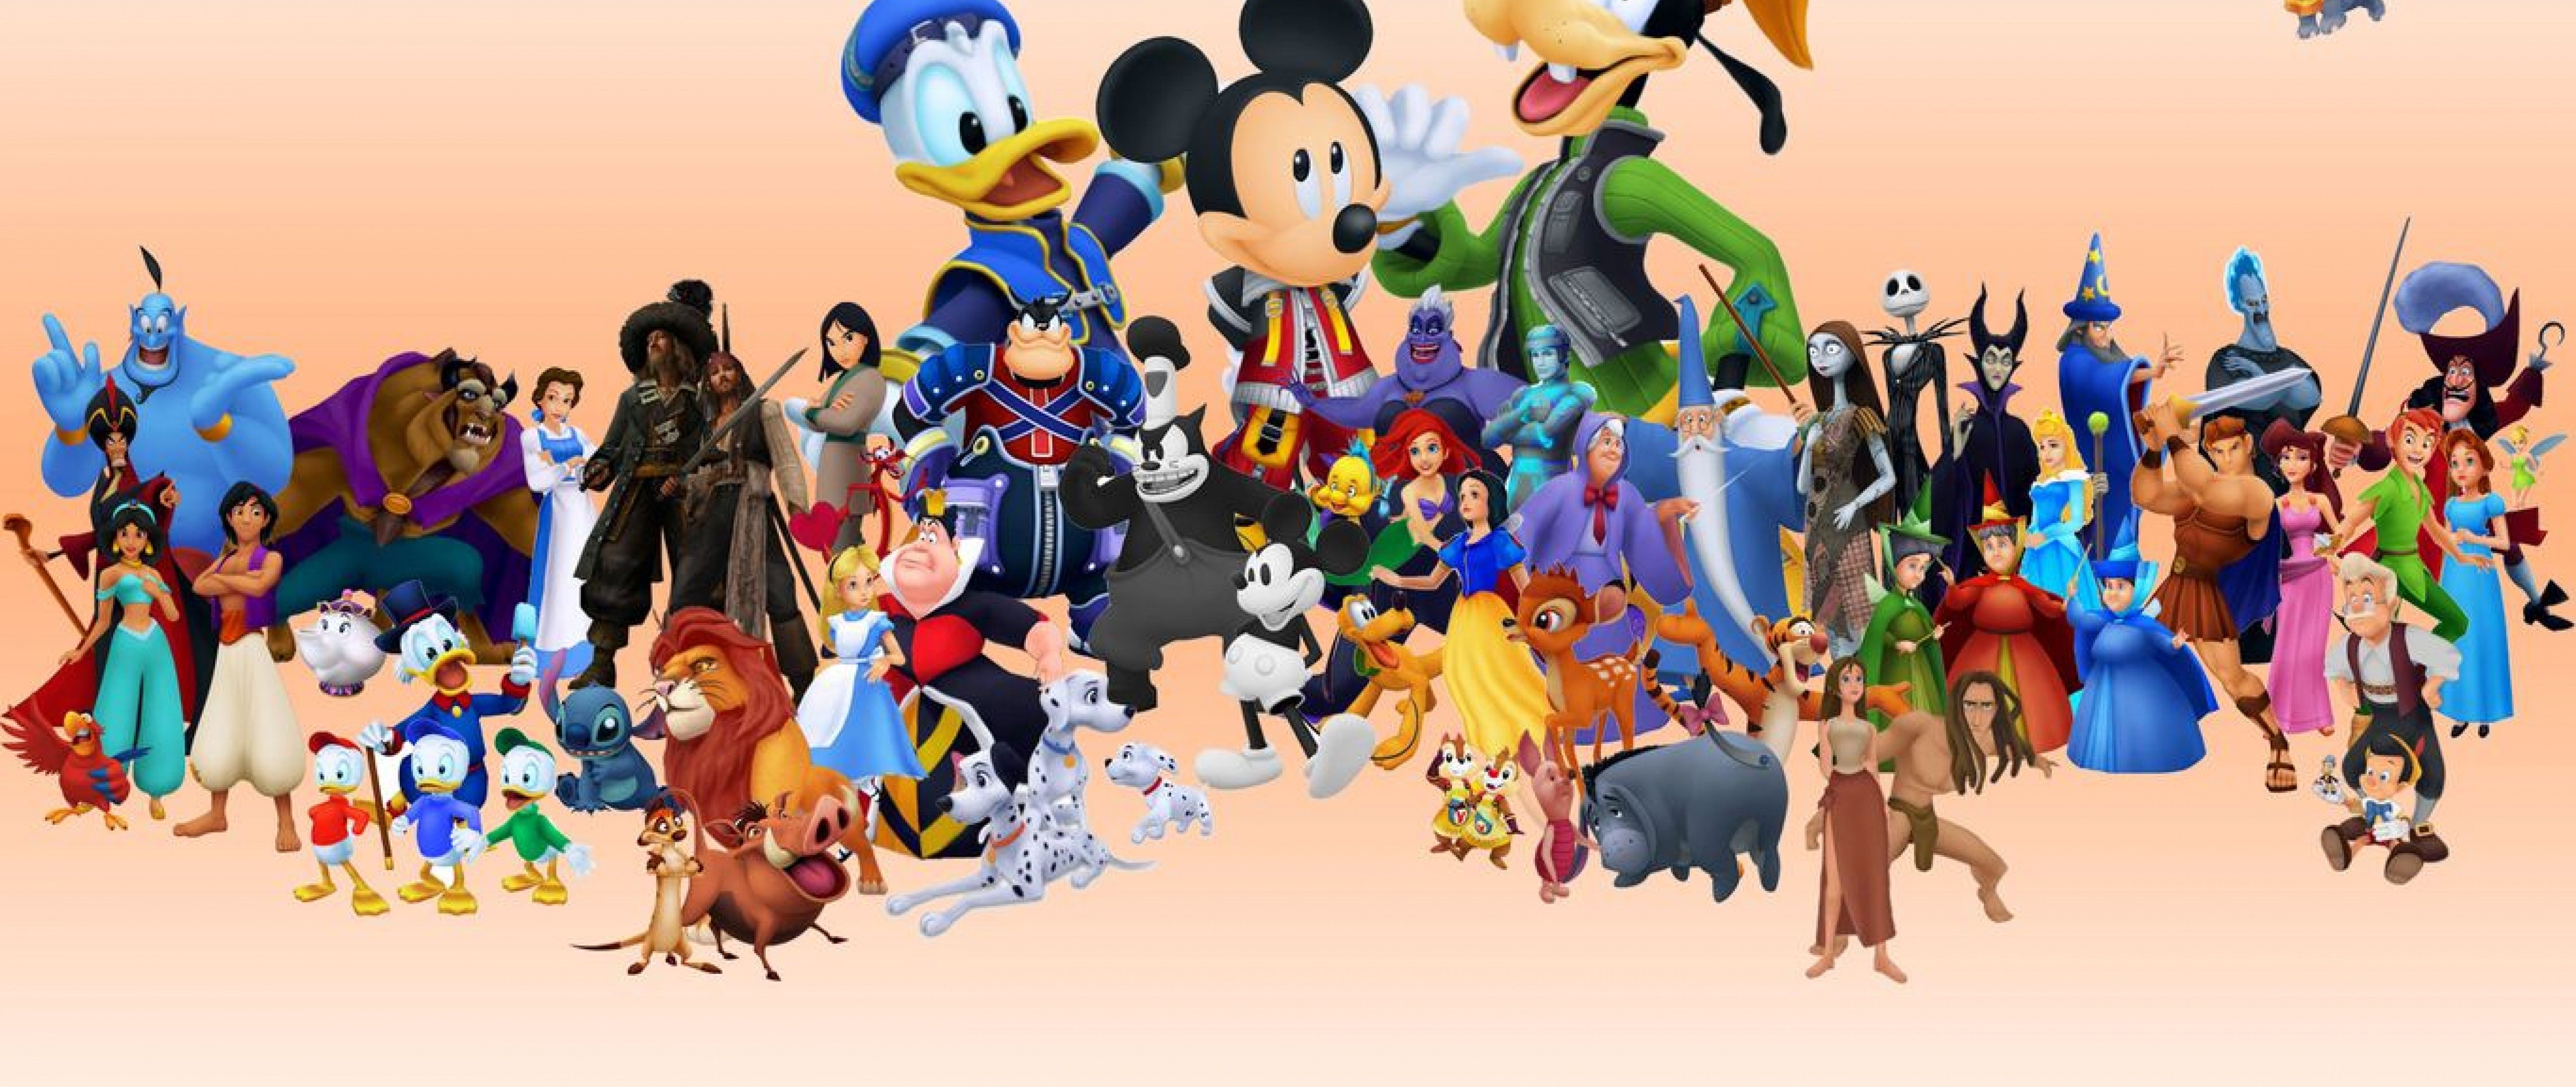 Disney World Characters HD Wallpaper for Desktop and Mobiles 4K Ultra HD Wide TV